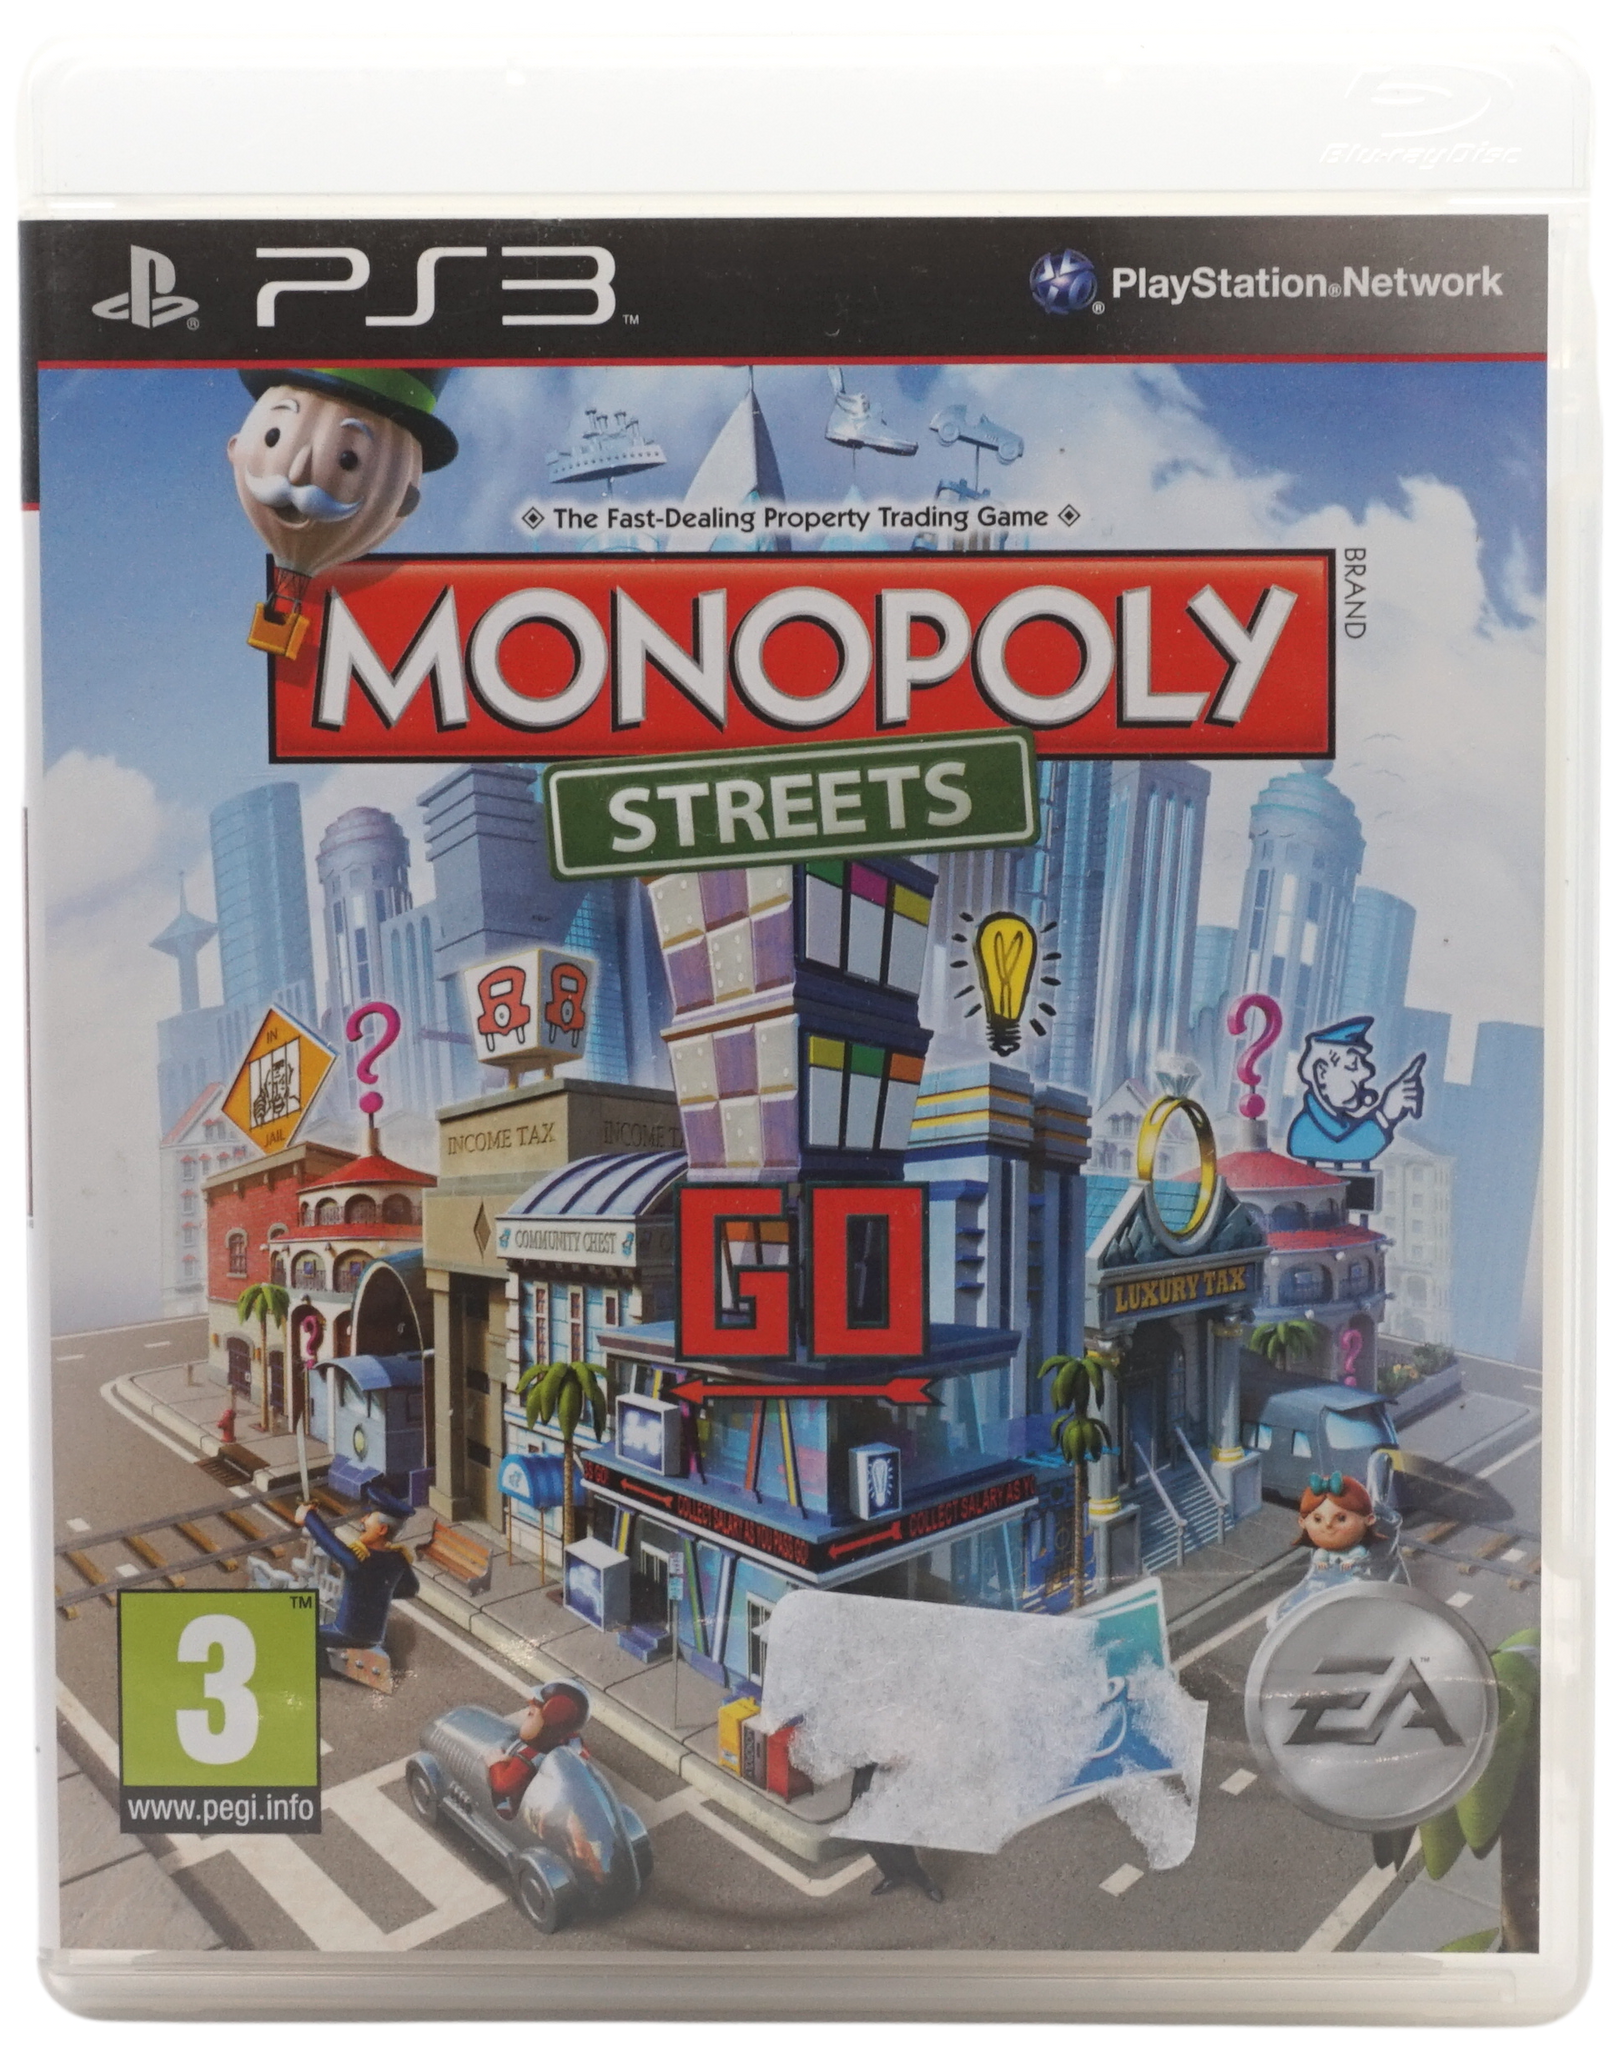 Monopoly Streets (PS3)